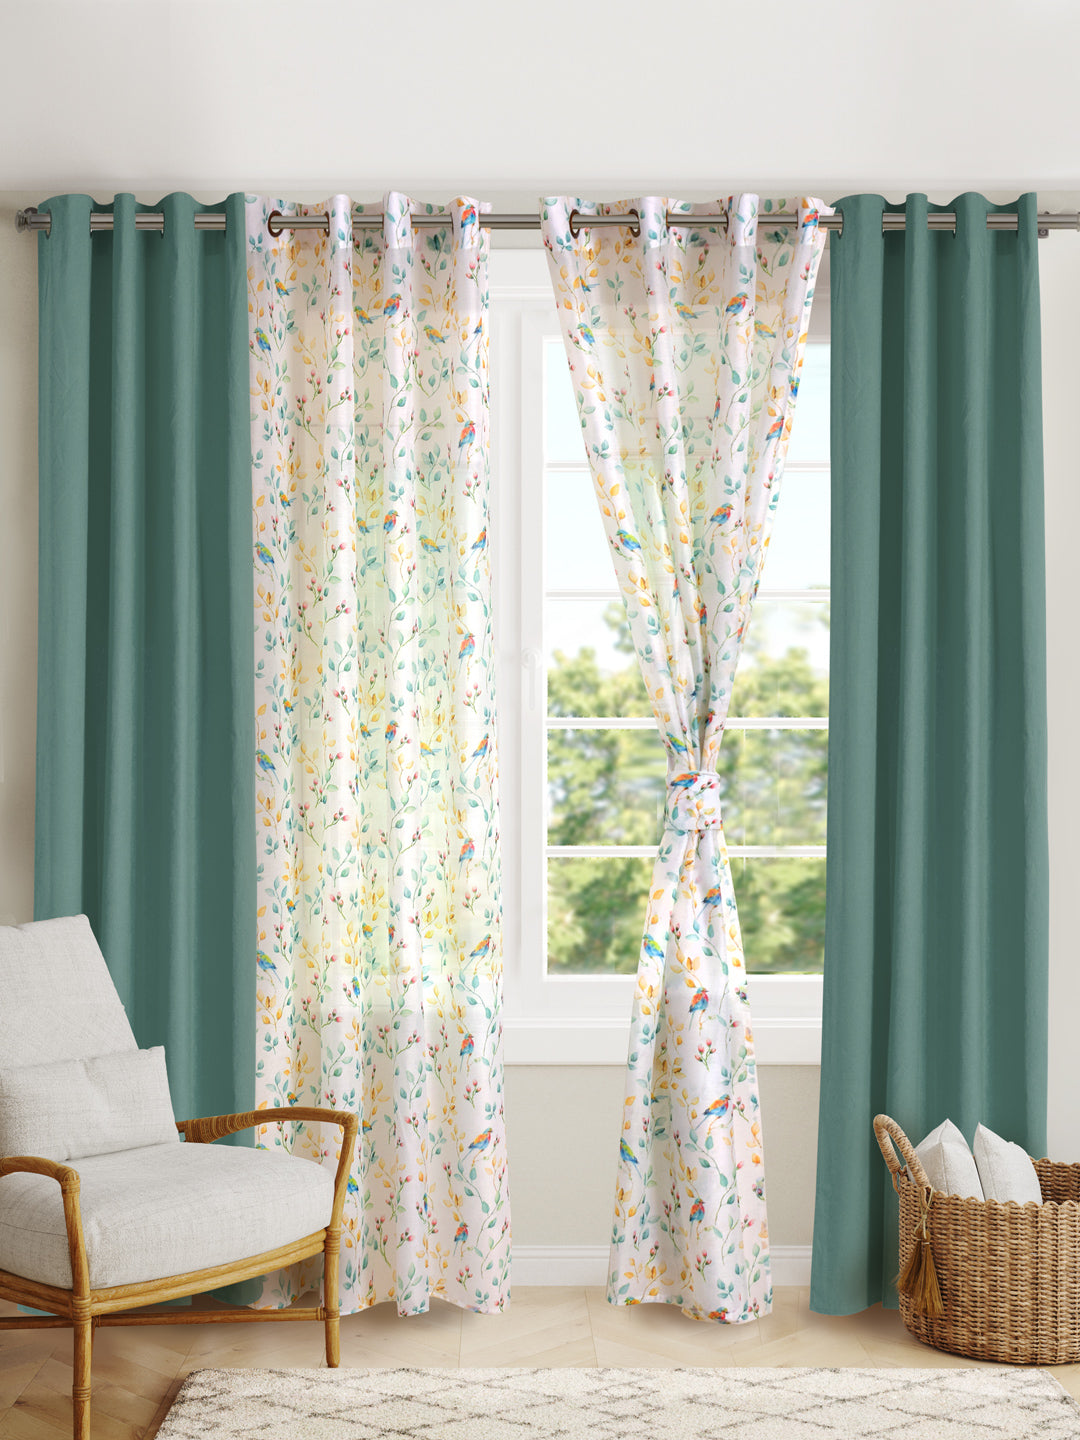 Blanc9 Set Of 4 Fauna Printed With Green Plain 7Ft. Curtains